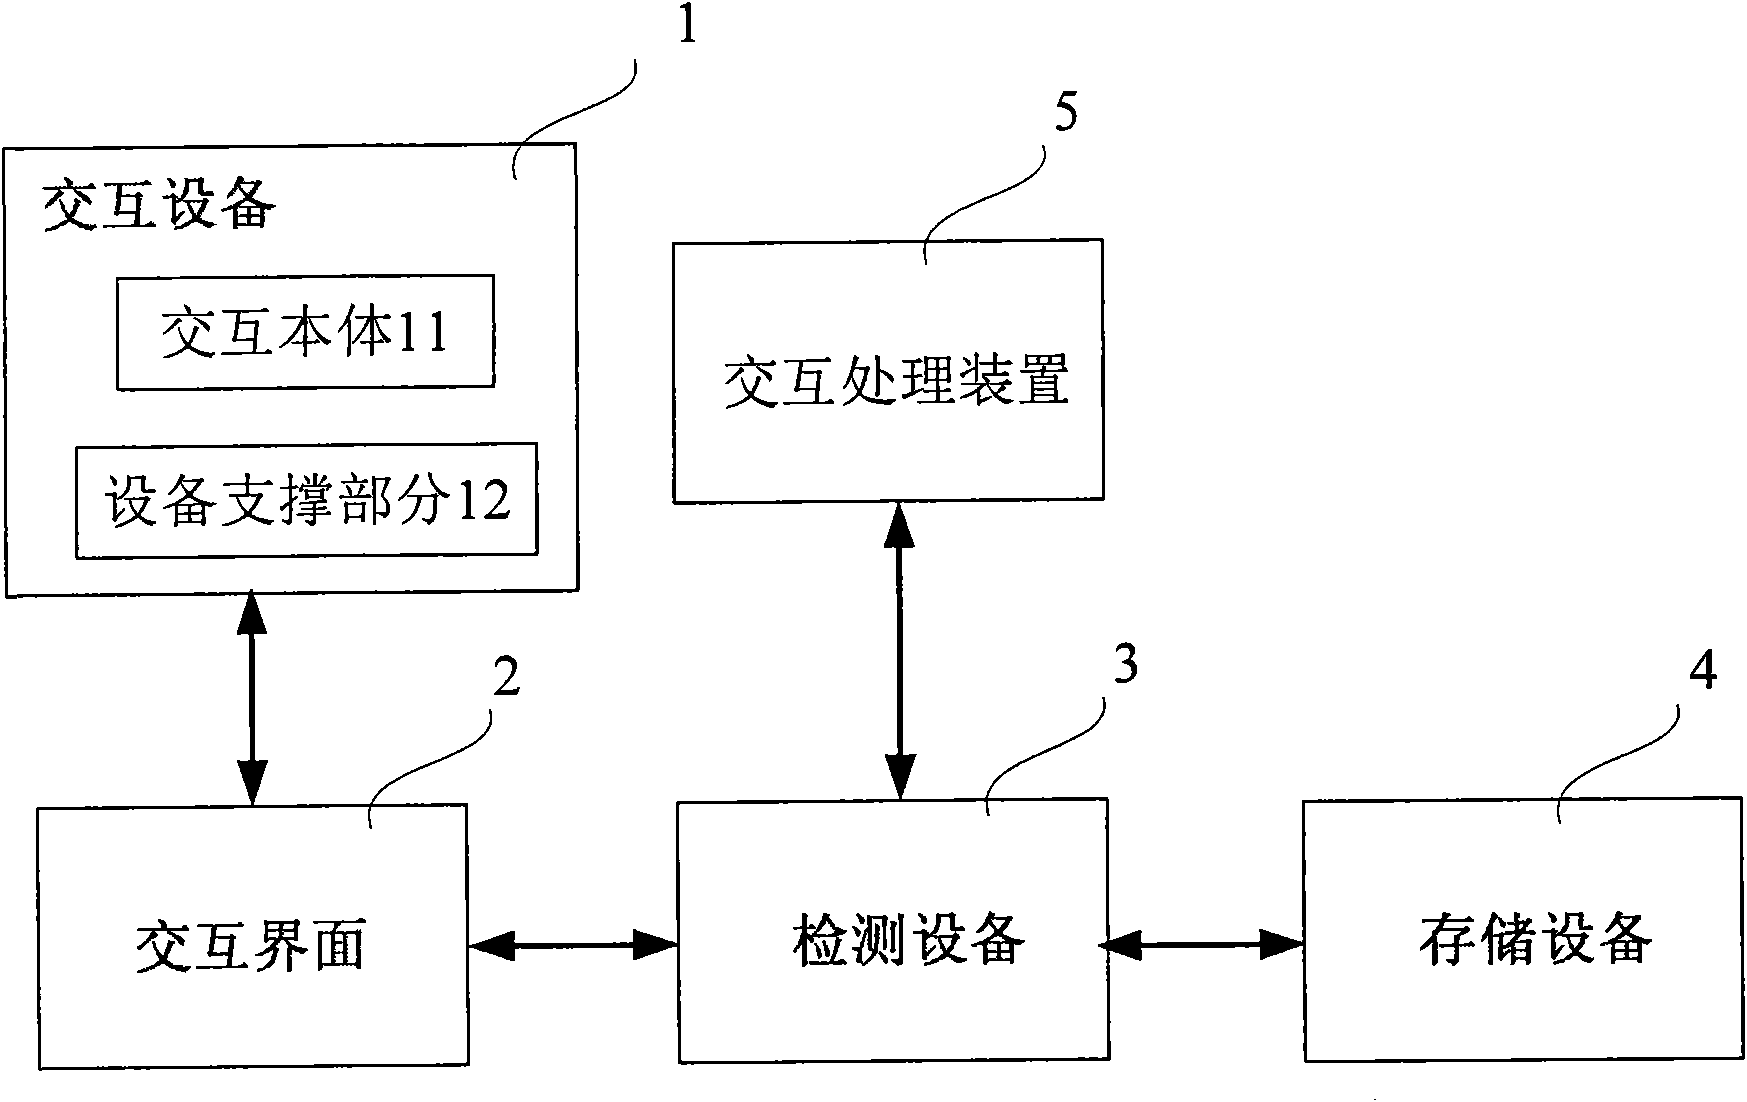 System and method for multi-contact interaction